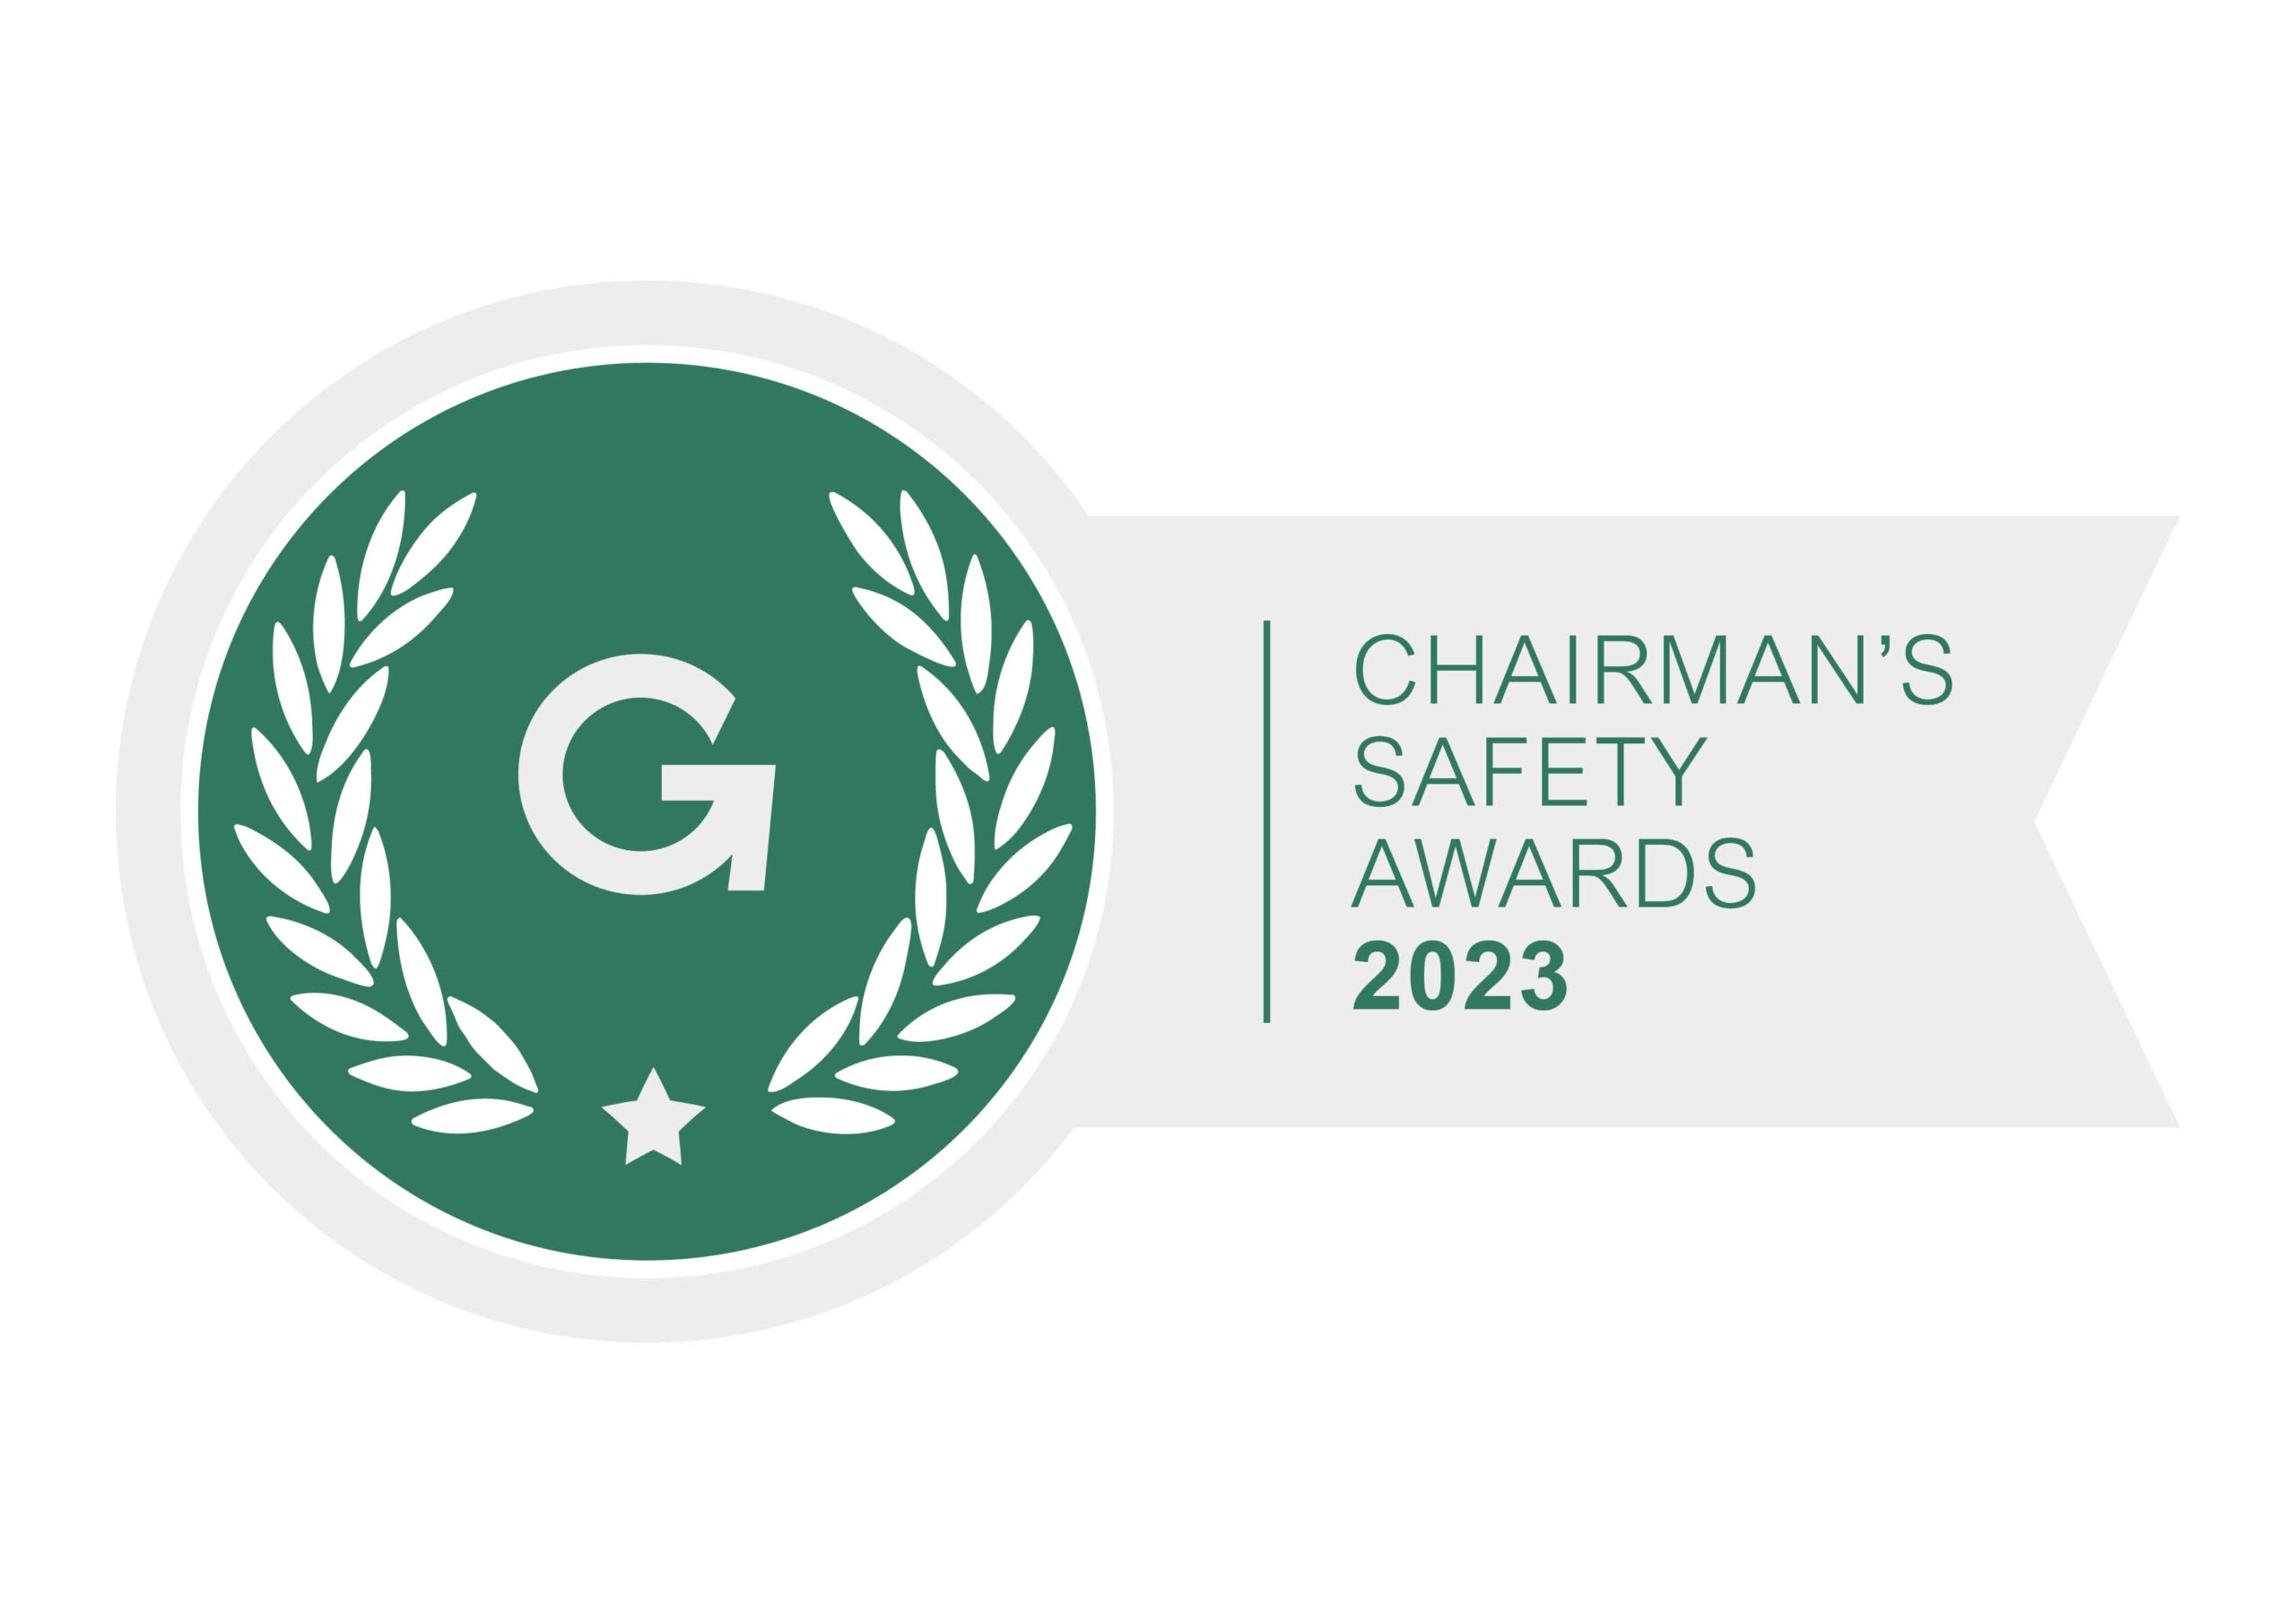 Chairmans Safety Awards Logo 2023 scaled